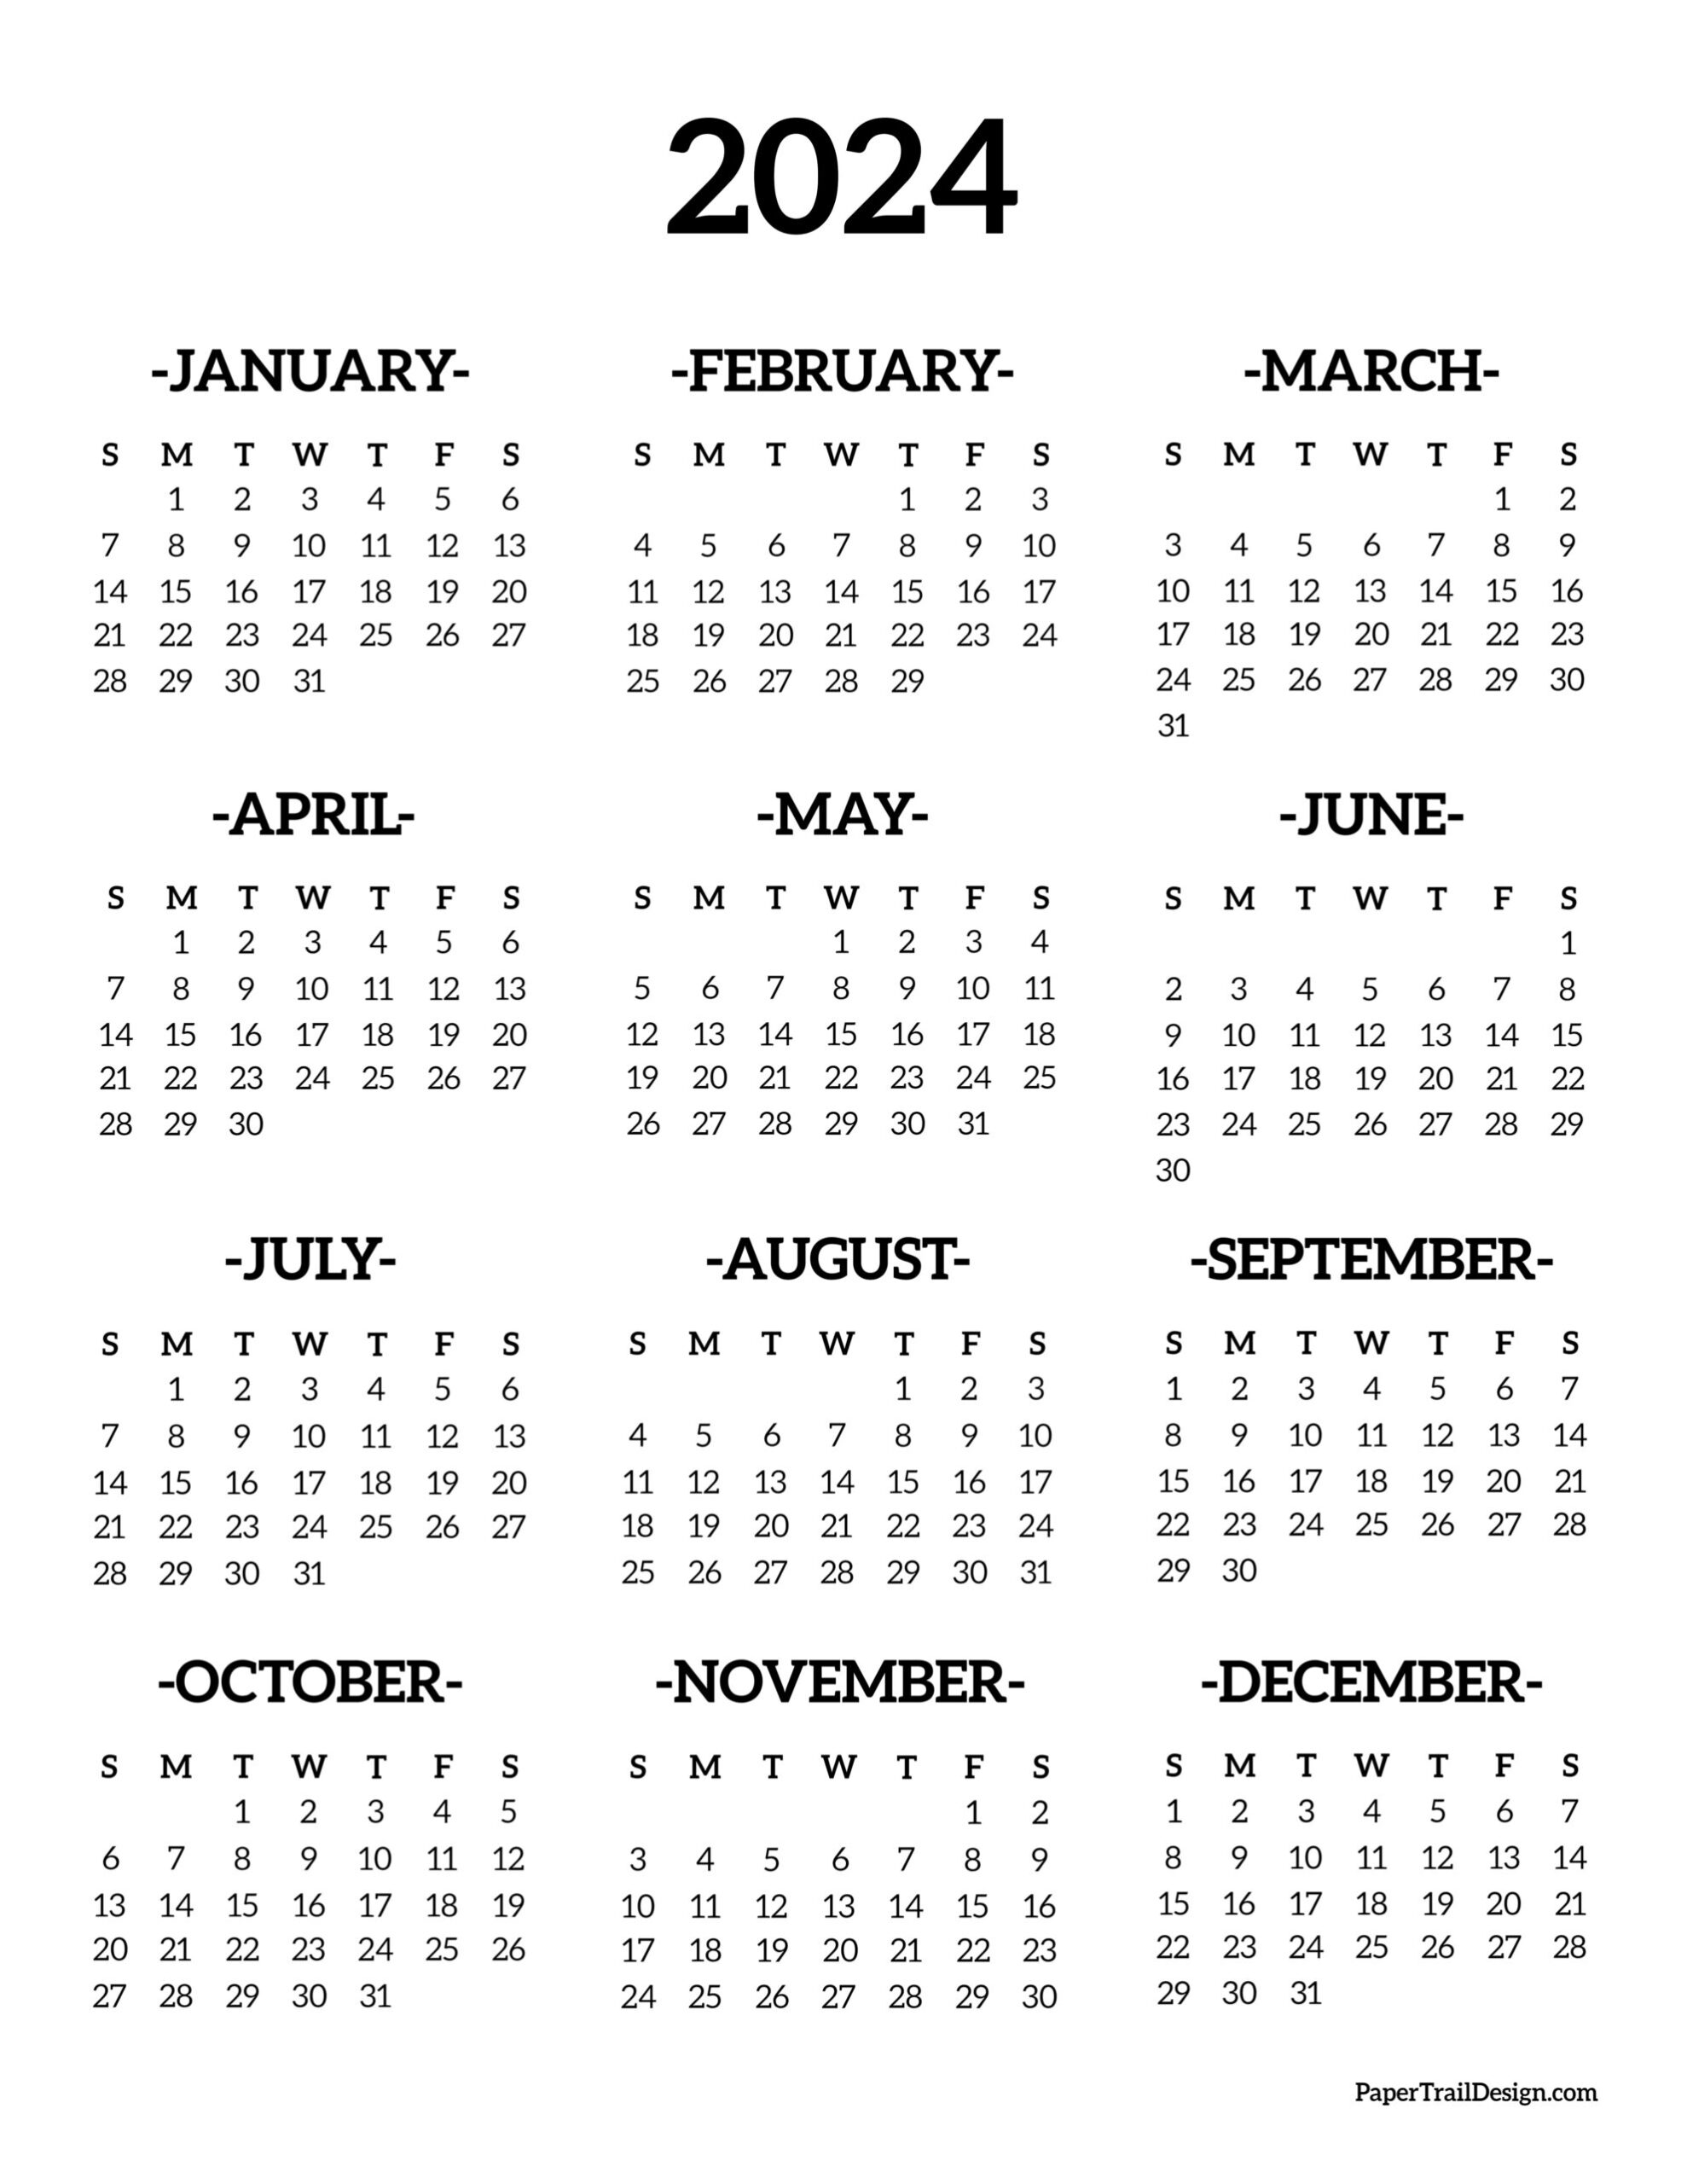 Calendar 2024 Printable One Page - Paper Trail Design for 2024 Calendar Year Printable